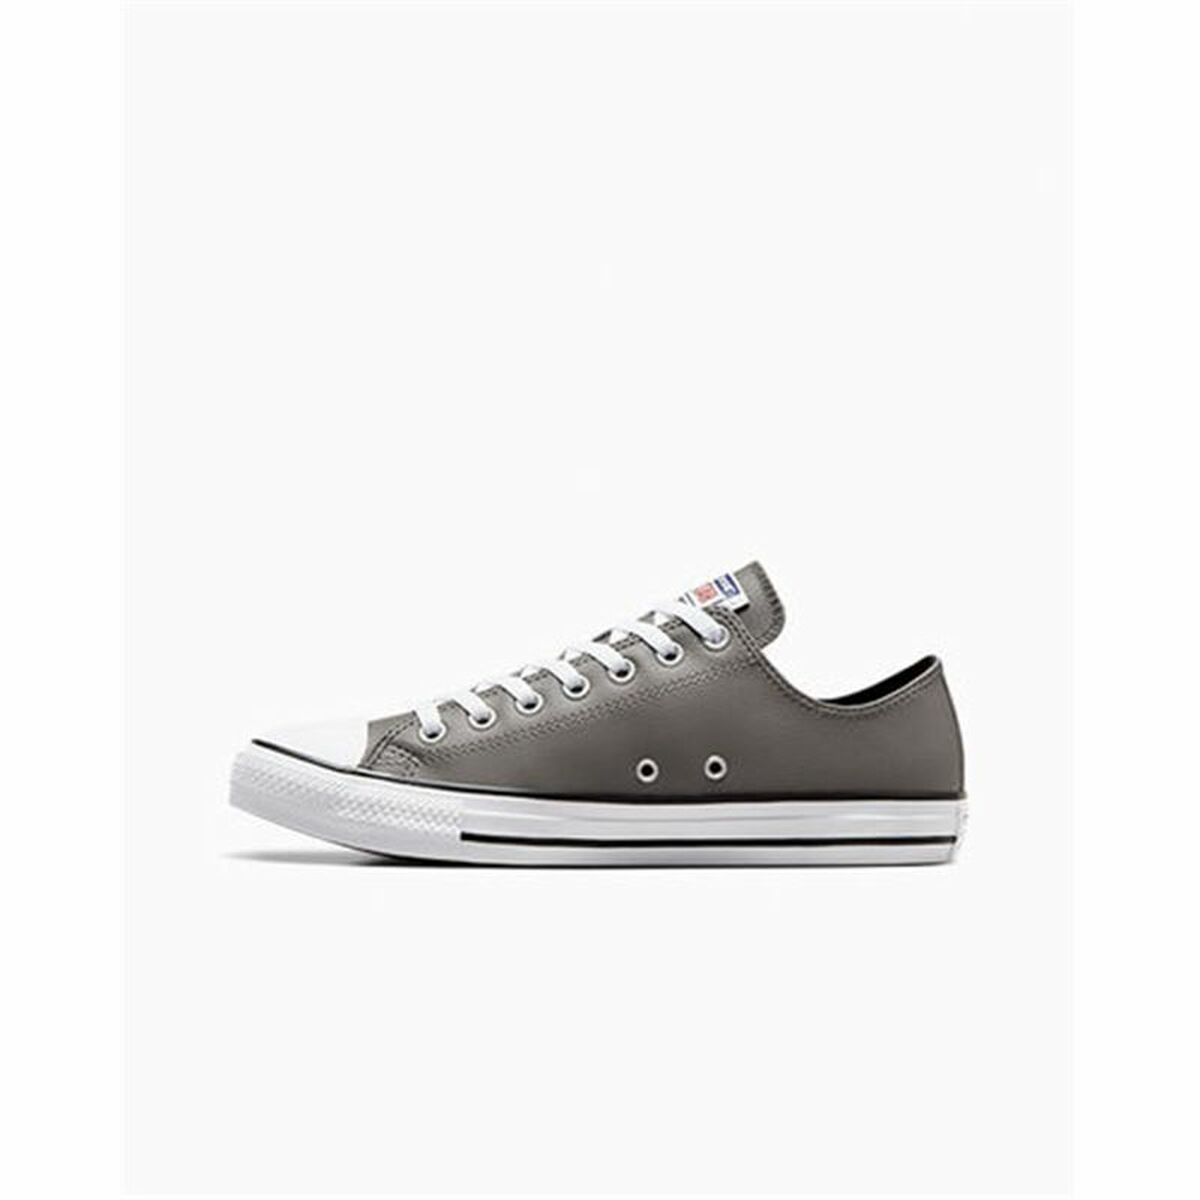 Chaussures casual femme Converse Chuck Taylor All Star Gris